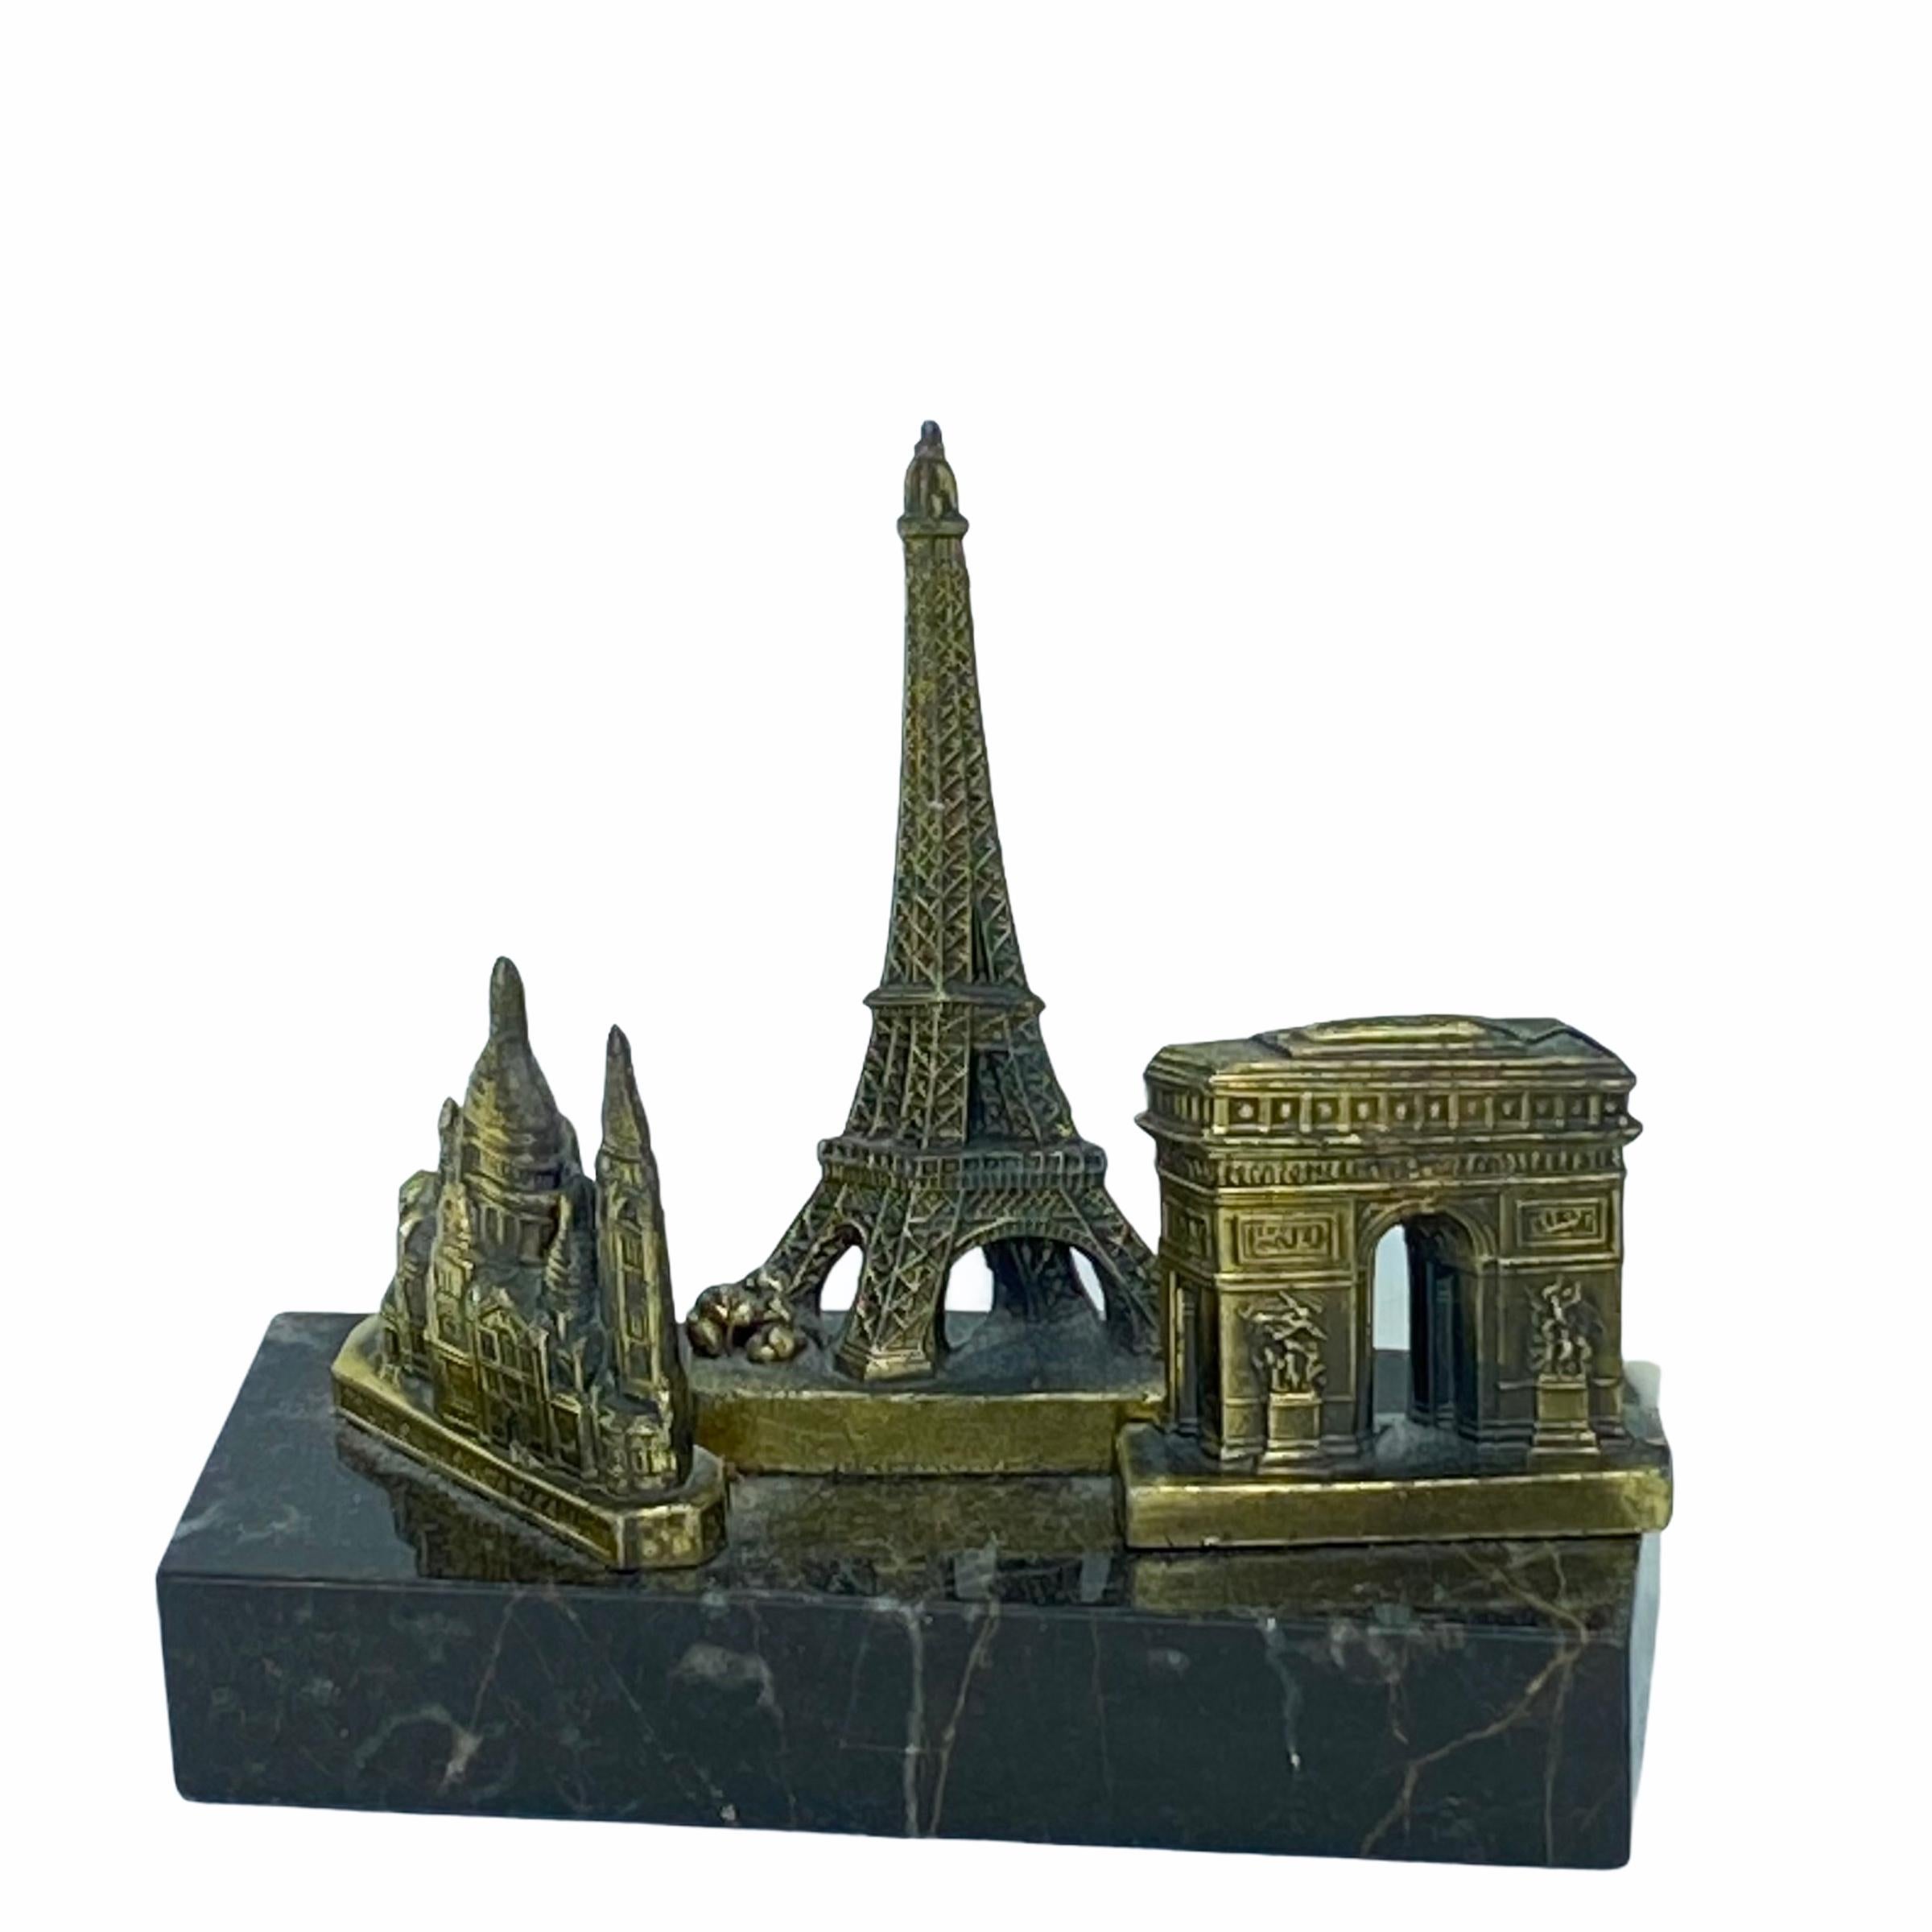 A decorative Eiffel Tower, Sacré-Coeur and Arc de Triomphe souvenir building sculpture. Some wear with a nice patina, but this is old-age. Made of metal and a marble base. This item was bought as a souvenir in Paris, France and was made probably in